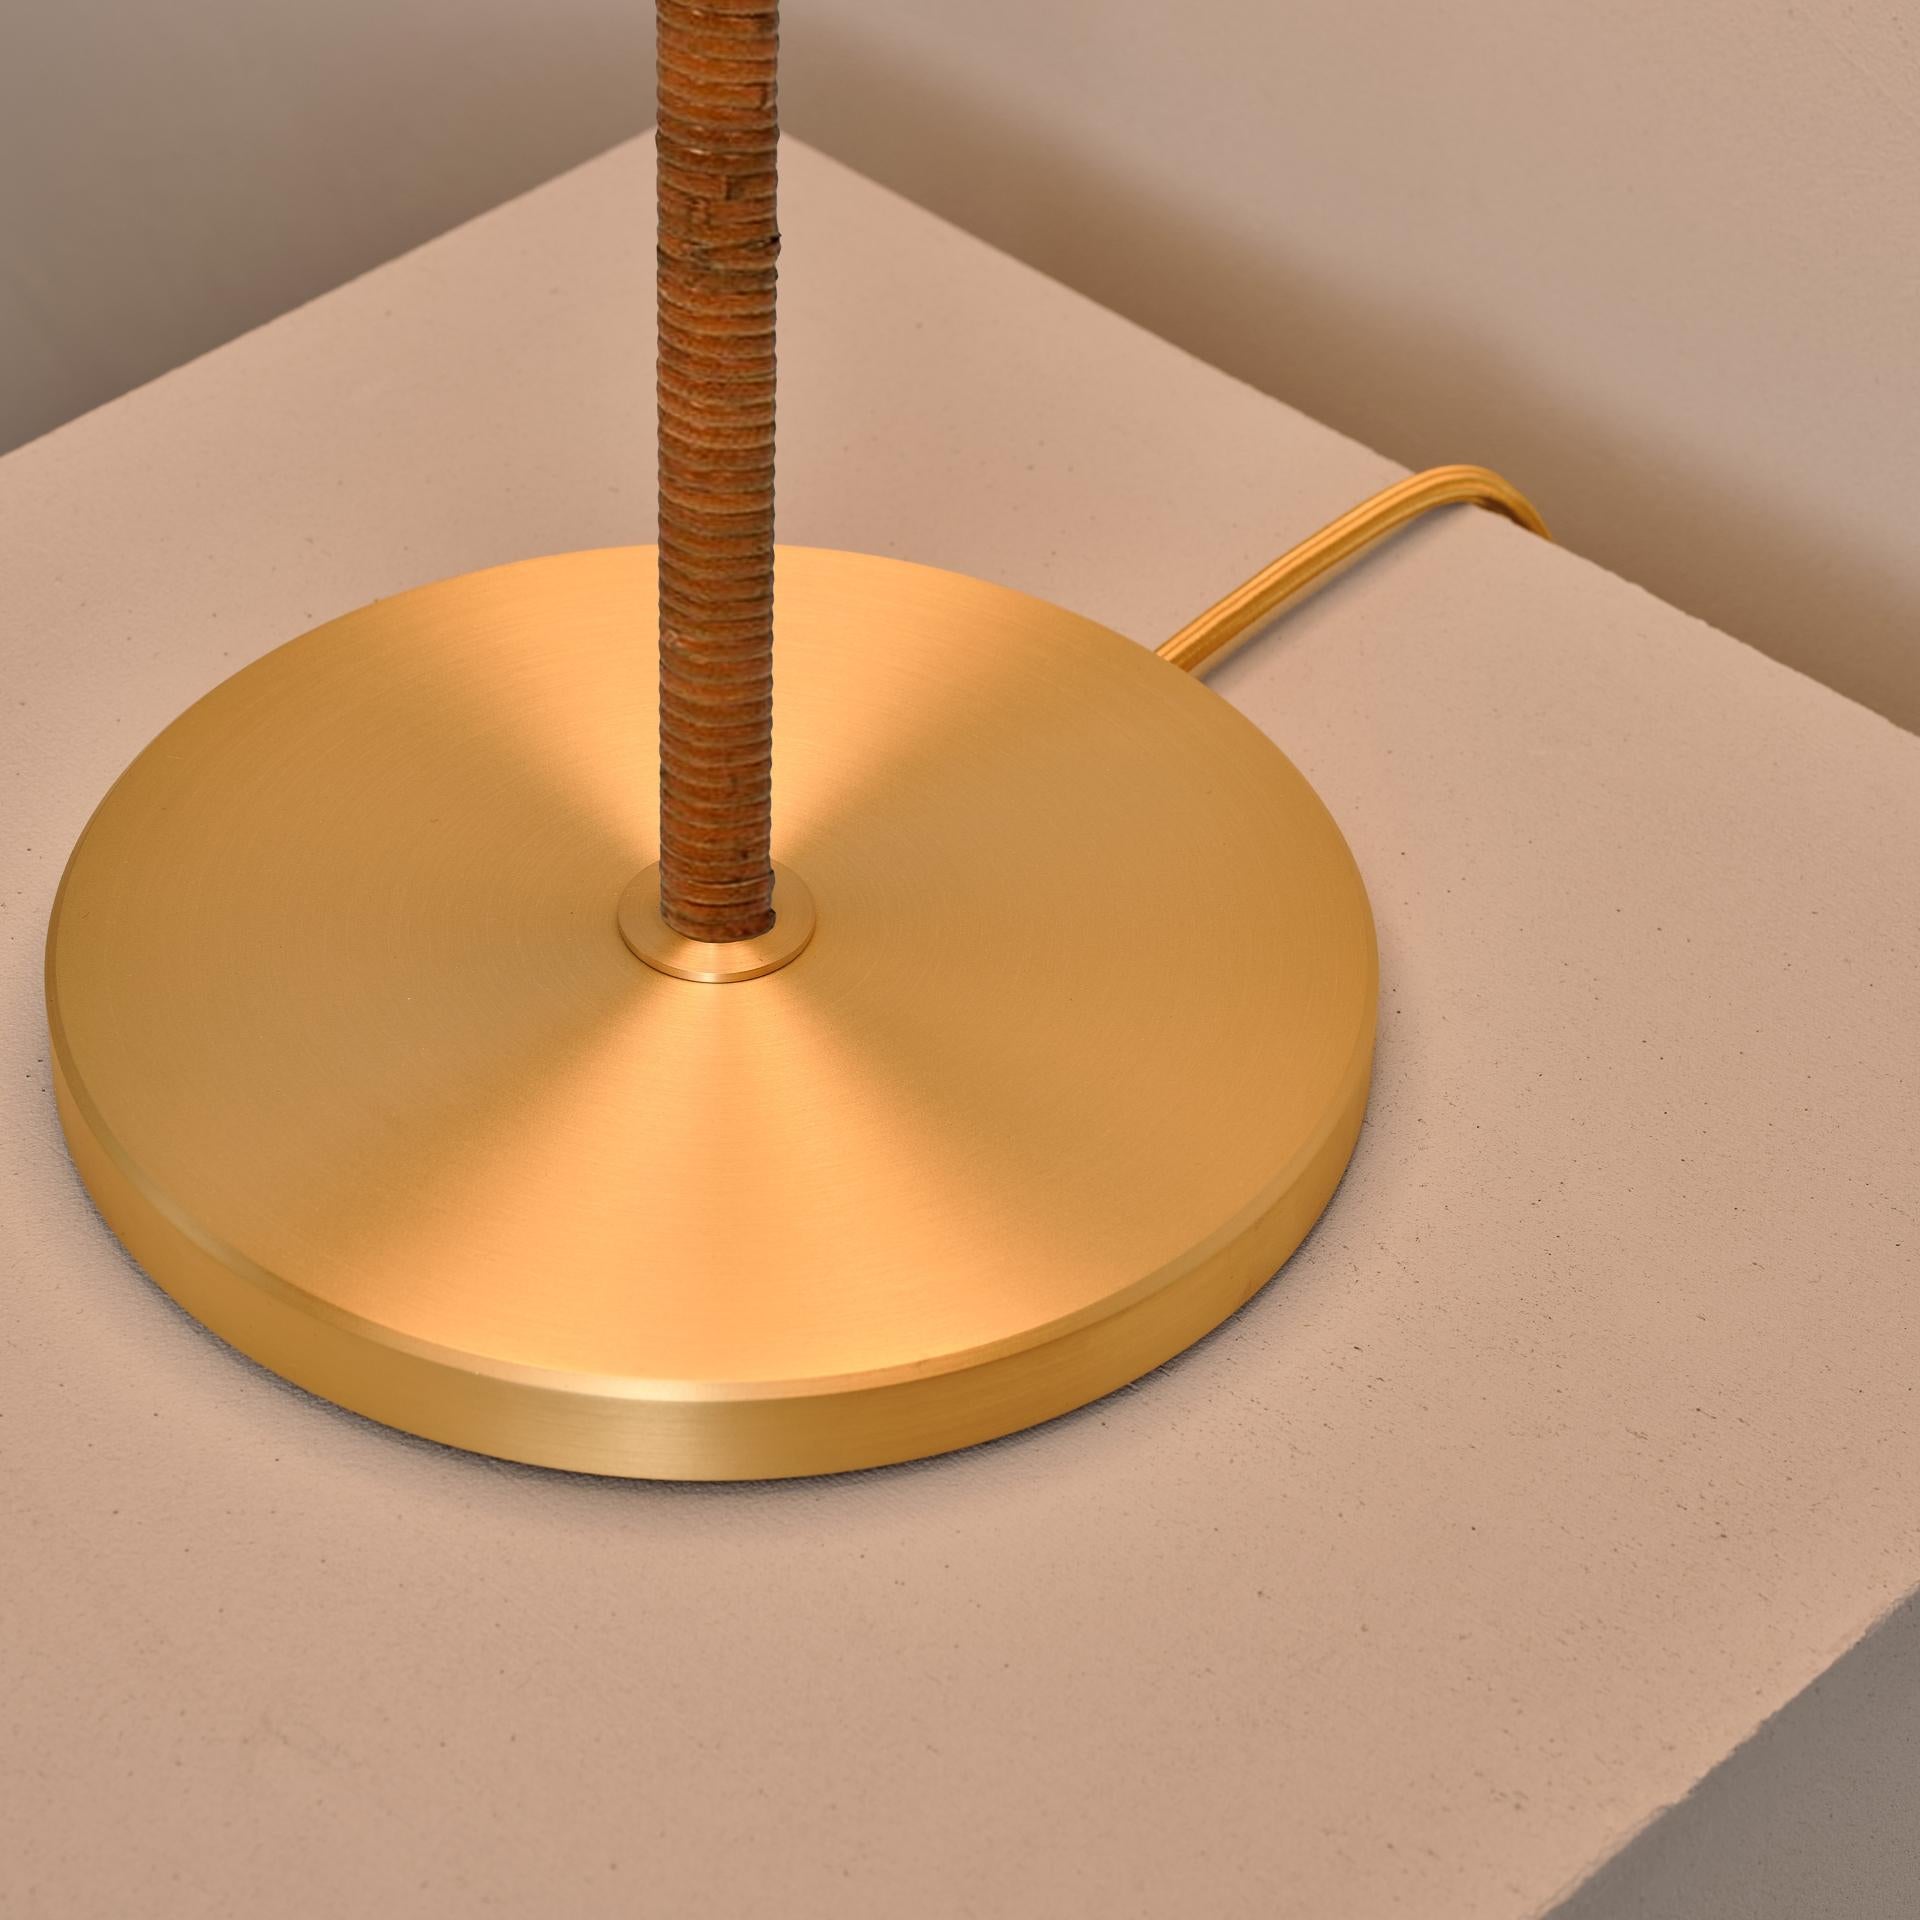 British 'Cosmic Solstice Caramel' Table Lamp, Handmade Leather Wrapped Brass Table Light For Sale